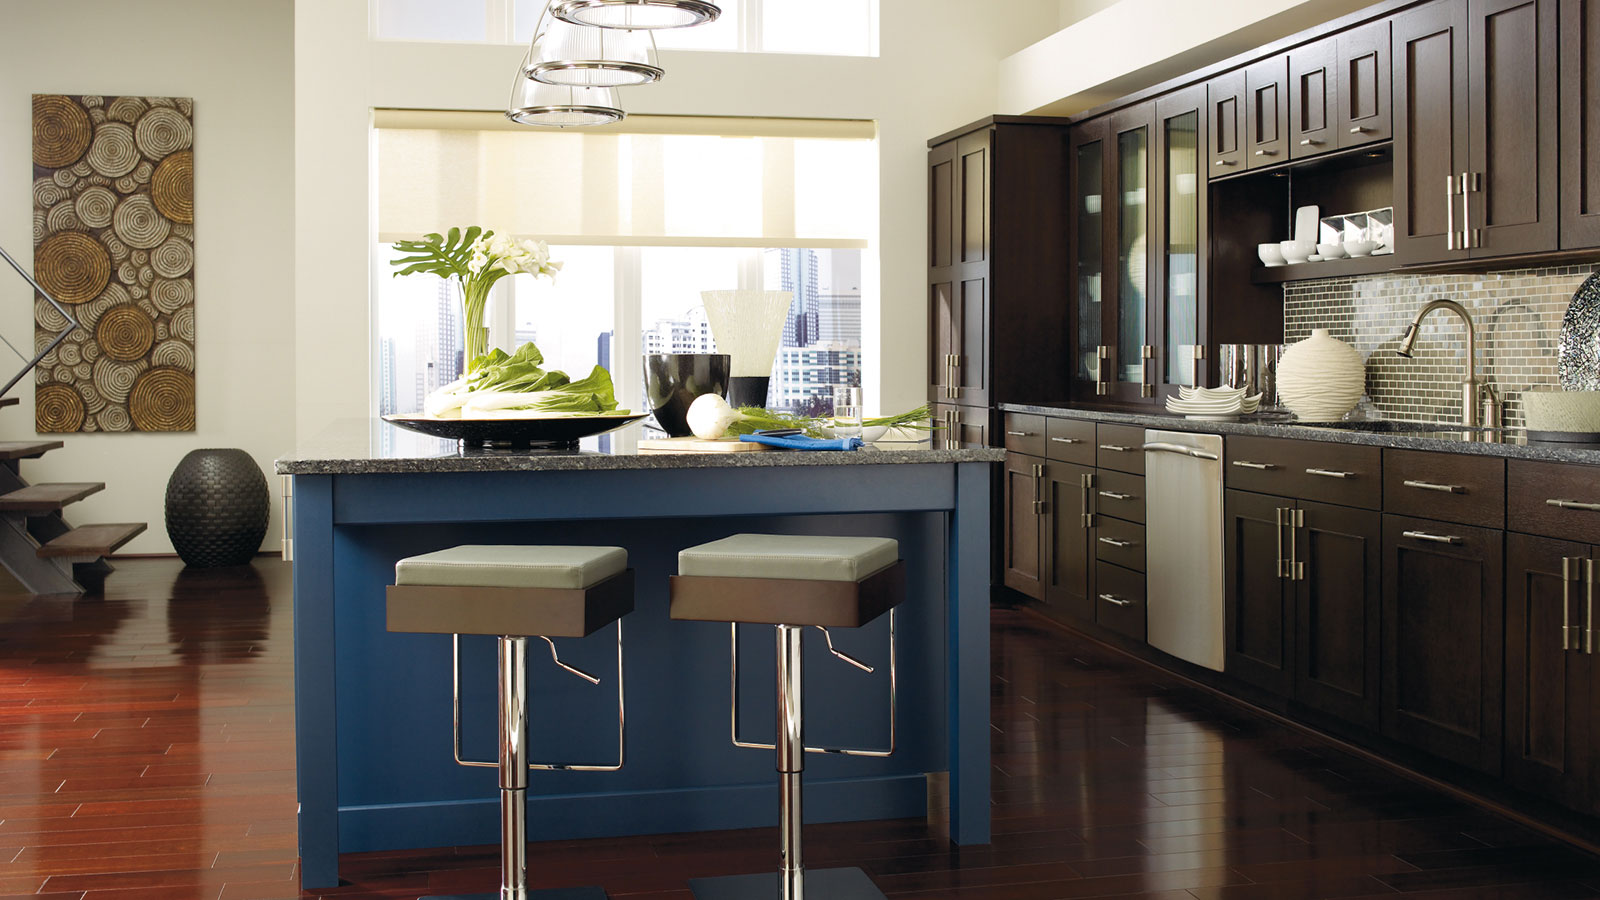 Dark Wood Cabinets With A Blue Kitchen Island - Omega